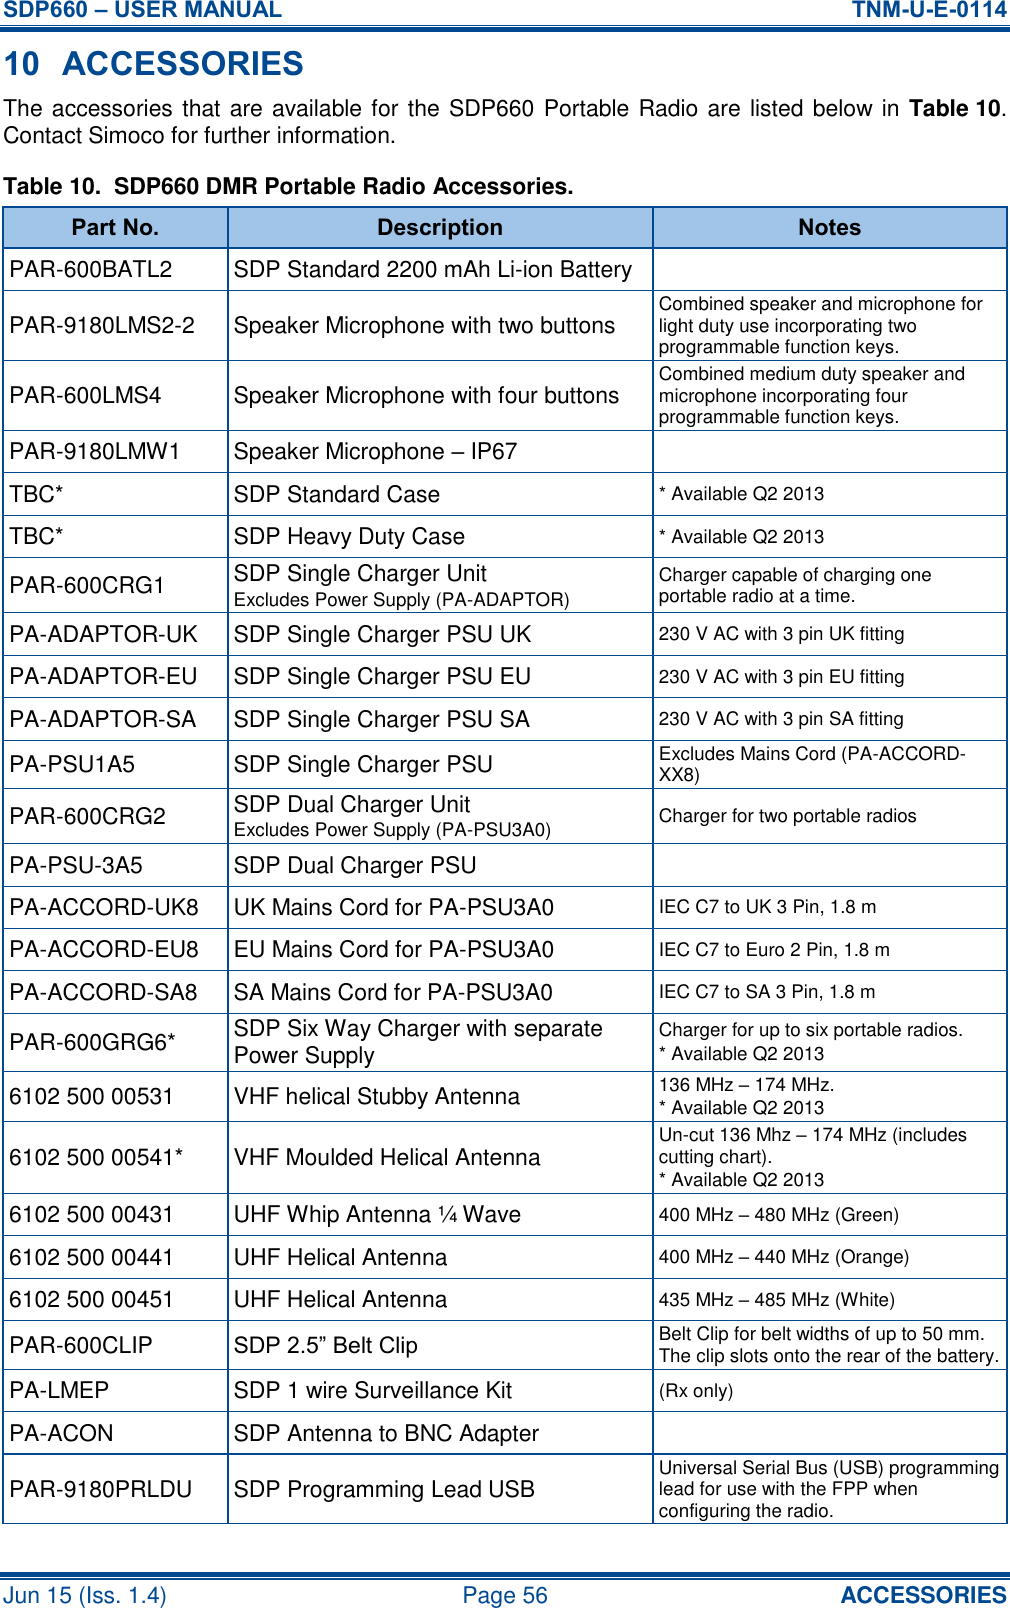 SDP660 – USER MANUAL  TNM-U-E-0114 Jun 15 (Iss. 1.4)  Page 56 ACCESSORIES 10 ACCESSORIES The accessories that are available for the SDP660 Portable Radio are listed below in  Table 10.  Contact Simoco for further information. Table 10.  SDP660 DMR Portable Radio Accessories. Part No. Description Notes PAR-600BATL2 SDP Standard 2200 mAh Li-ion Battery  PAR-9180LMS2-2 Speaker Microphone with two buttons Combined speaker and microphone for light duty use incorporating two programmable function keys. PAR-600LMS4 Speaker Microphone with four buttons Combined medium duty speaker and microphone incorporating four programmable function keys. PAR-9180LMW1 Speaker Microphone – IP67  TBC* SDP Standard Case * Available Q2 2013 TBC* SDP Heavy Duty Case * Available Q2 2013 PAR-600CRG1 SDP Single Charger Unit Excludes Power Supply (PA-ADAPTOR) Charger capable of charging one portable radio at a time. PA-ADAPTOR-UK SDP Single Charger PSU UK 230 V AC with 3 pin UK fitting PA-ADAPTOR-EU SDP Single Charger PSU EU 230 V AC with 3 pin EU fitting PA-ADAPTOR-SA SDP Single Charger PSU SA 230 V AC with 3 pin SA fitting PA-PSU1A5 SDP Single Charger PSU Excludes Mains Cord (PA-ACCORD-XX8) PAR-600CRG2 SDP Dual Charger Unit Excludes Power Supply (PA-PSU3A0) Charger for two portable radios PA-PSU-3A5 SDP Dual Charger PSU  PA-ACCORD-UK8 UK Mains Cord for PA-PSU3A0 IEC C7 to UK 3 Pin, 1.8 m PA-ACCORD-EU8 EU Mains Cord for PA-PSU3A0 IEC C7 to Euro 2 Pin, 1.8 m PA-ACCORD-SA8 SA Mains Cord for PA-PSU3A0 IEC C7 to SA 3 Pin, 1.8 m PAR-600GRG6* SDP Six Way Charger with separate Power Supply Charger for up to six portable radios. * Available Q2 2013 6102 500 00531 VHF helical Stubby Antenna 136 MHz – 174 MHz. * Available Q2 2013 6102 500 00541* VHF Moulded Helical Antenna Un-cut 136 Mhz – 174 MHz (includes cutting chart). * Available Q2 2013 6102 500 00431 UHF Whip Antenna ¼ Wave 400 MHz – 480 MHz (Green) 6102 500 00441 UHF Helical Antenna 400 MHz – 440 MHz (Orange) 6102 500 00451 UHF Helical Antenna 435 MHz – 485 MHz (White) PAR-600CLIP SDP 2.5” Belt Clip Belt Clip for belt widths of up to 50 mm.  The clip slots onto the rear of the battery. PA-LMEP SDP 1 wire Surveillance Kit (Rx only) PA-ACON SDP Antenna to BNC Adapter  PAR-9180PRLDU SDP Programming Lead USB Universal Serial Bus (USB) programming lead for use with the FPP when configuring the radio. 